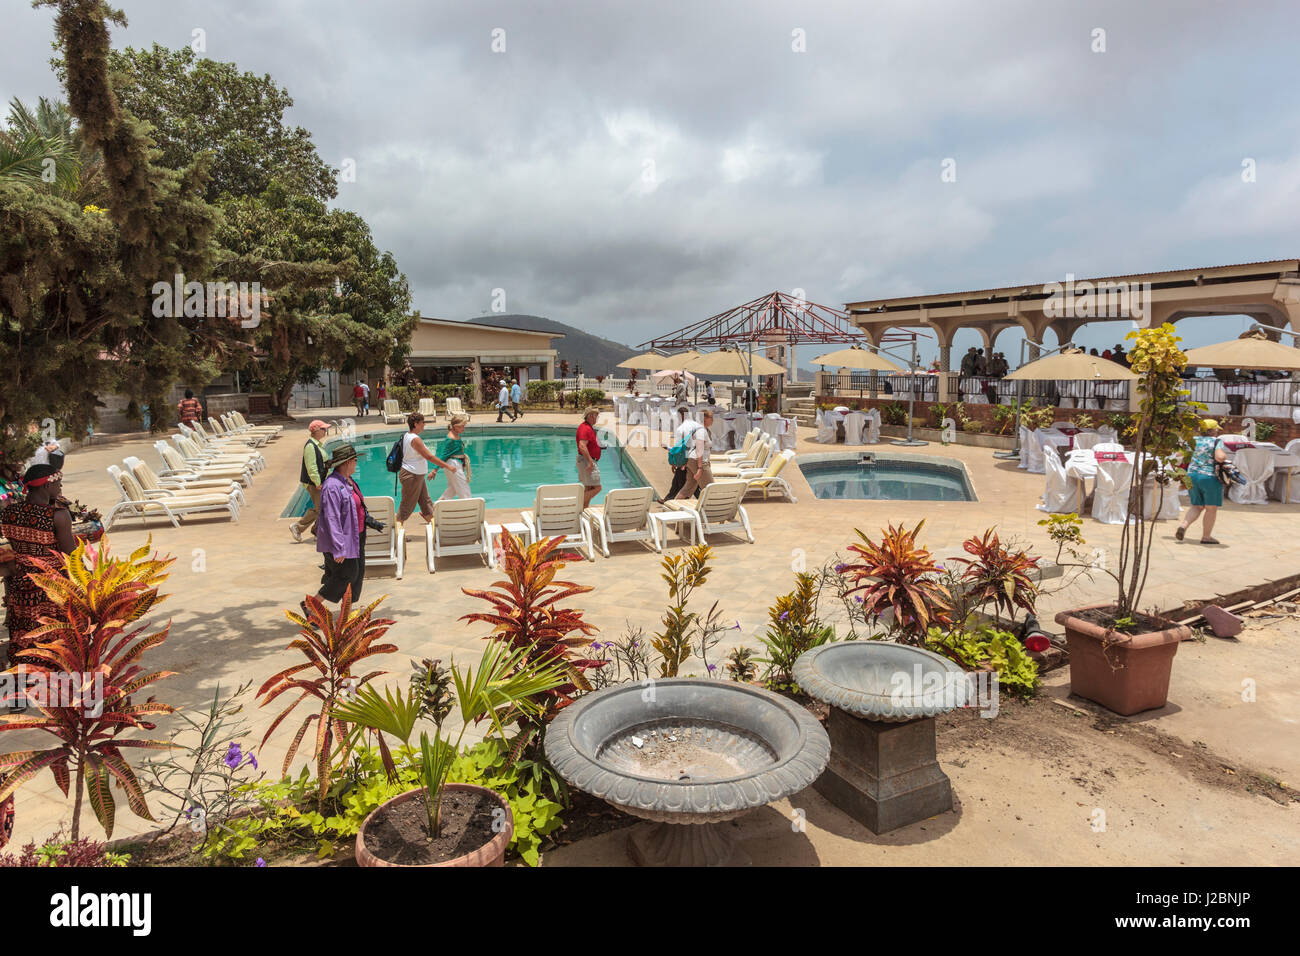 Africa, Sierra Leone, Freetown. Tourists at a hotel pool and patio. Stock Photo